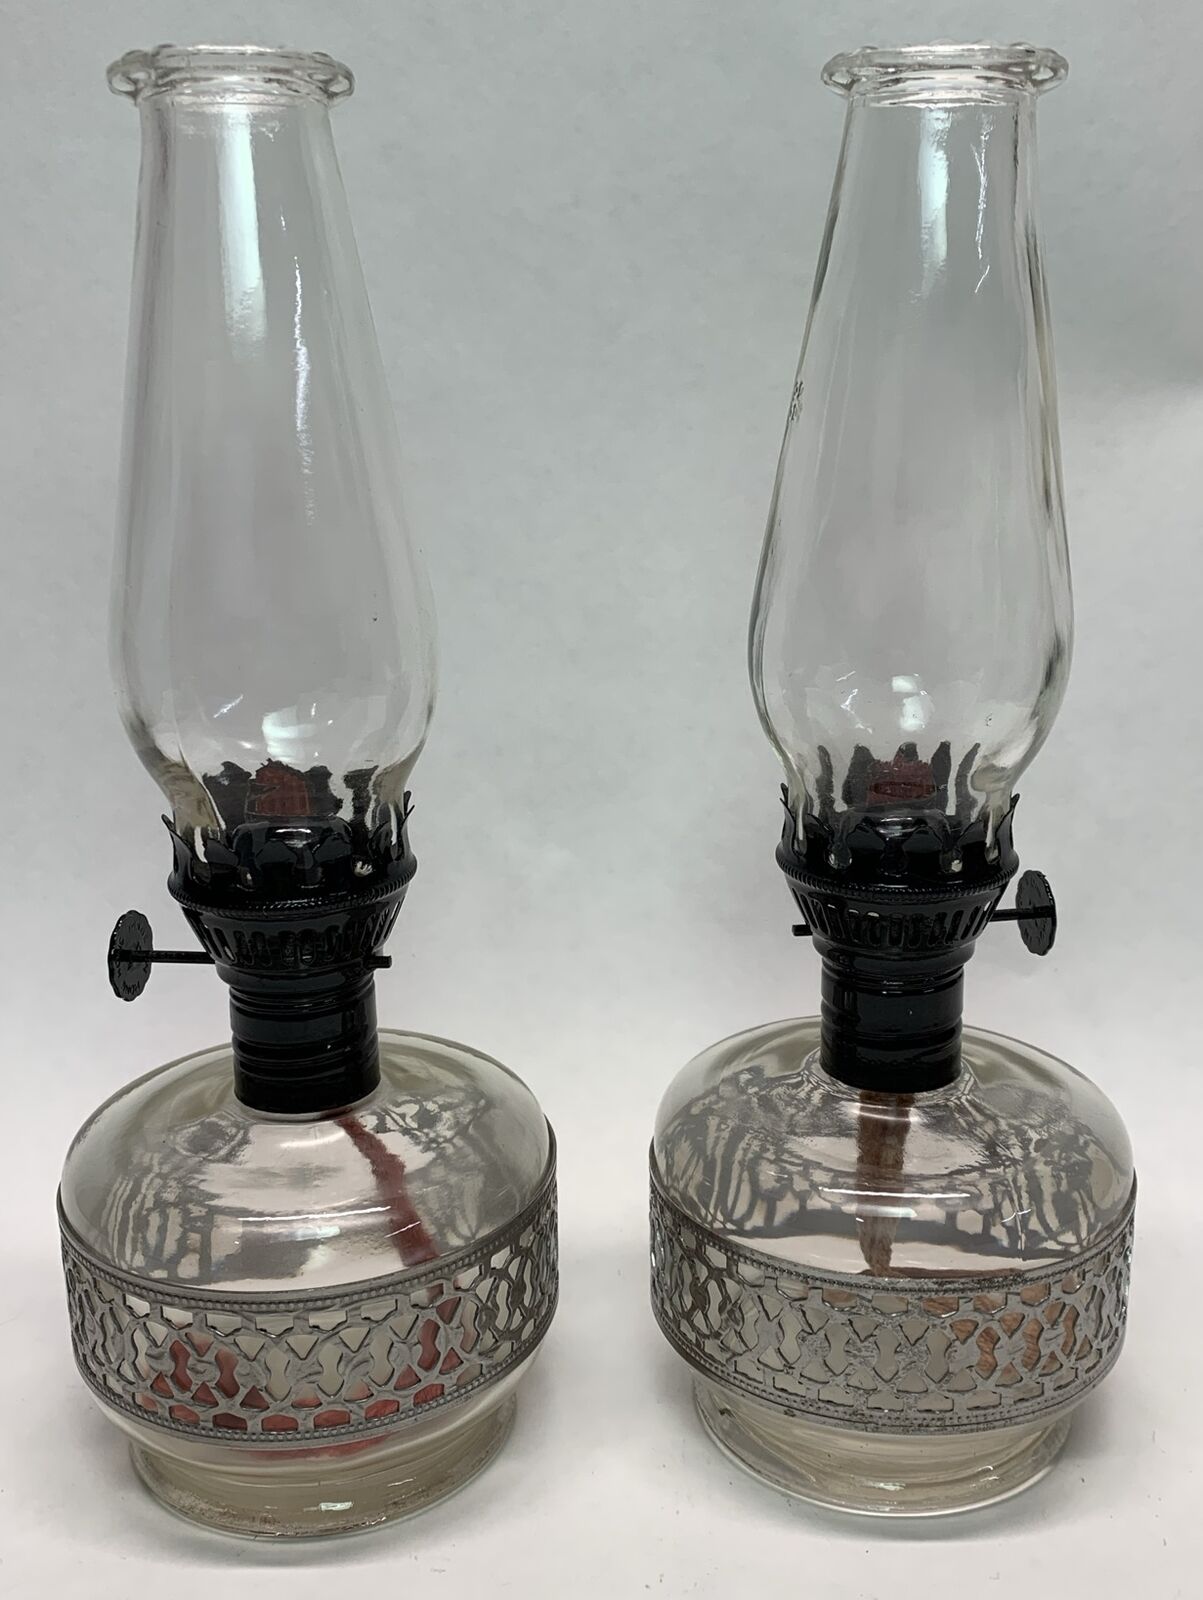 Vintage Pair of 8” Oil Lamps Clear Glass w/Metal Accent